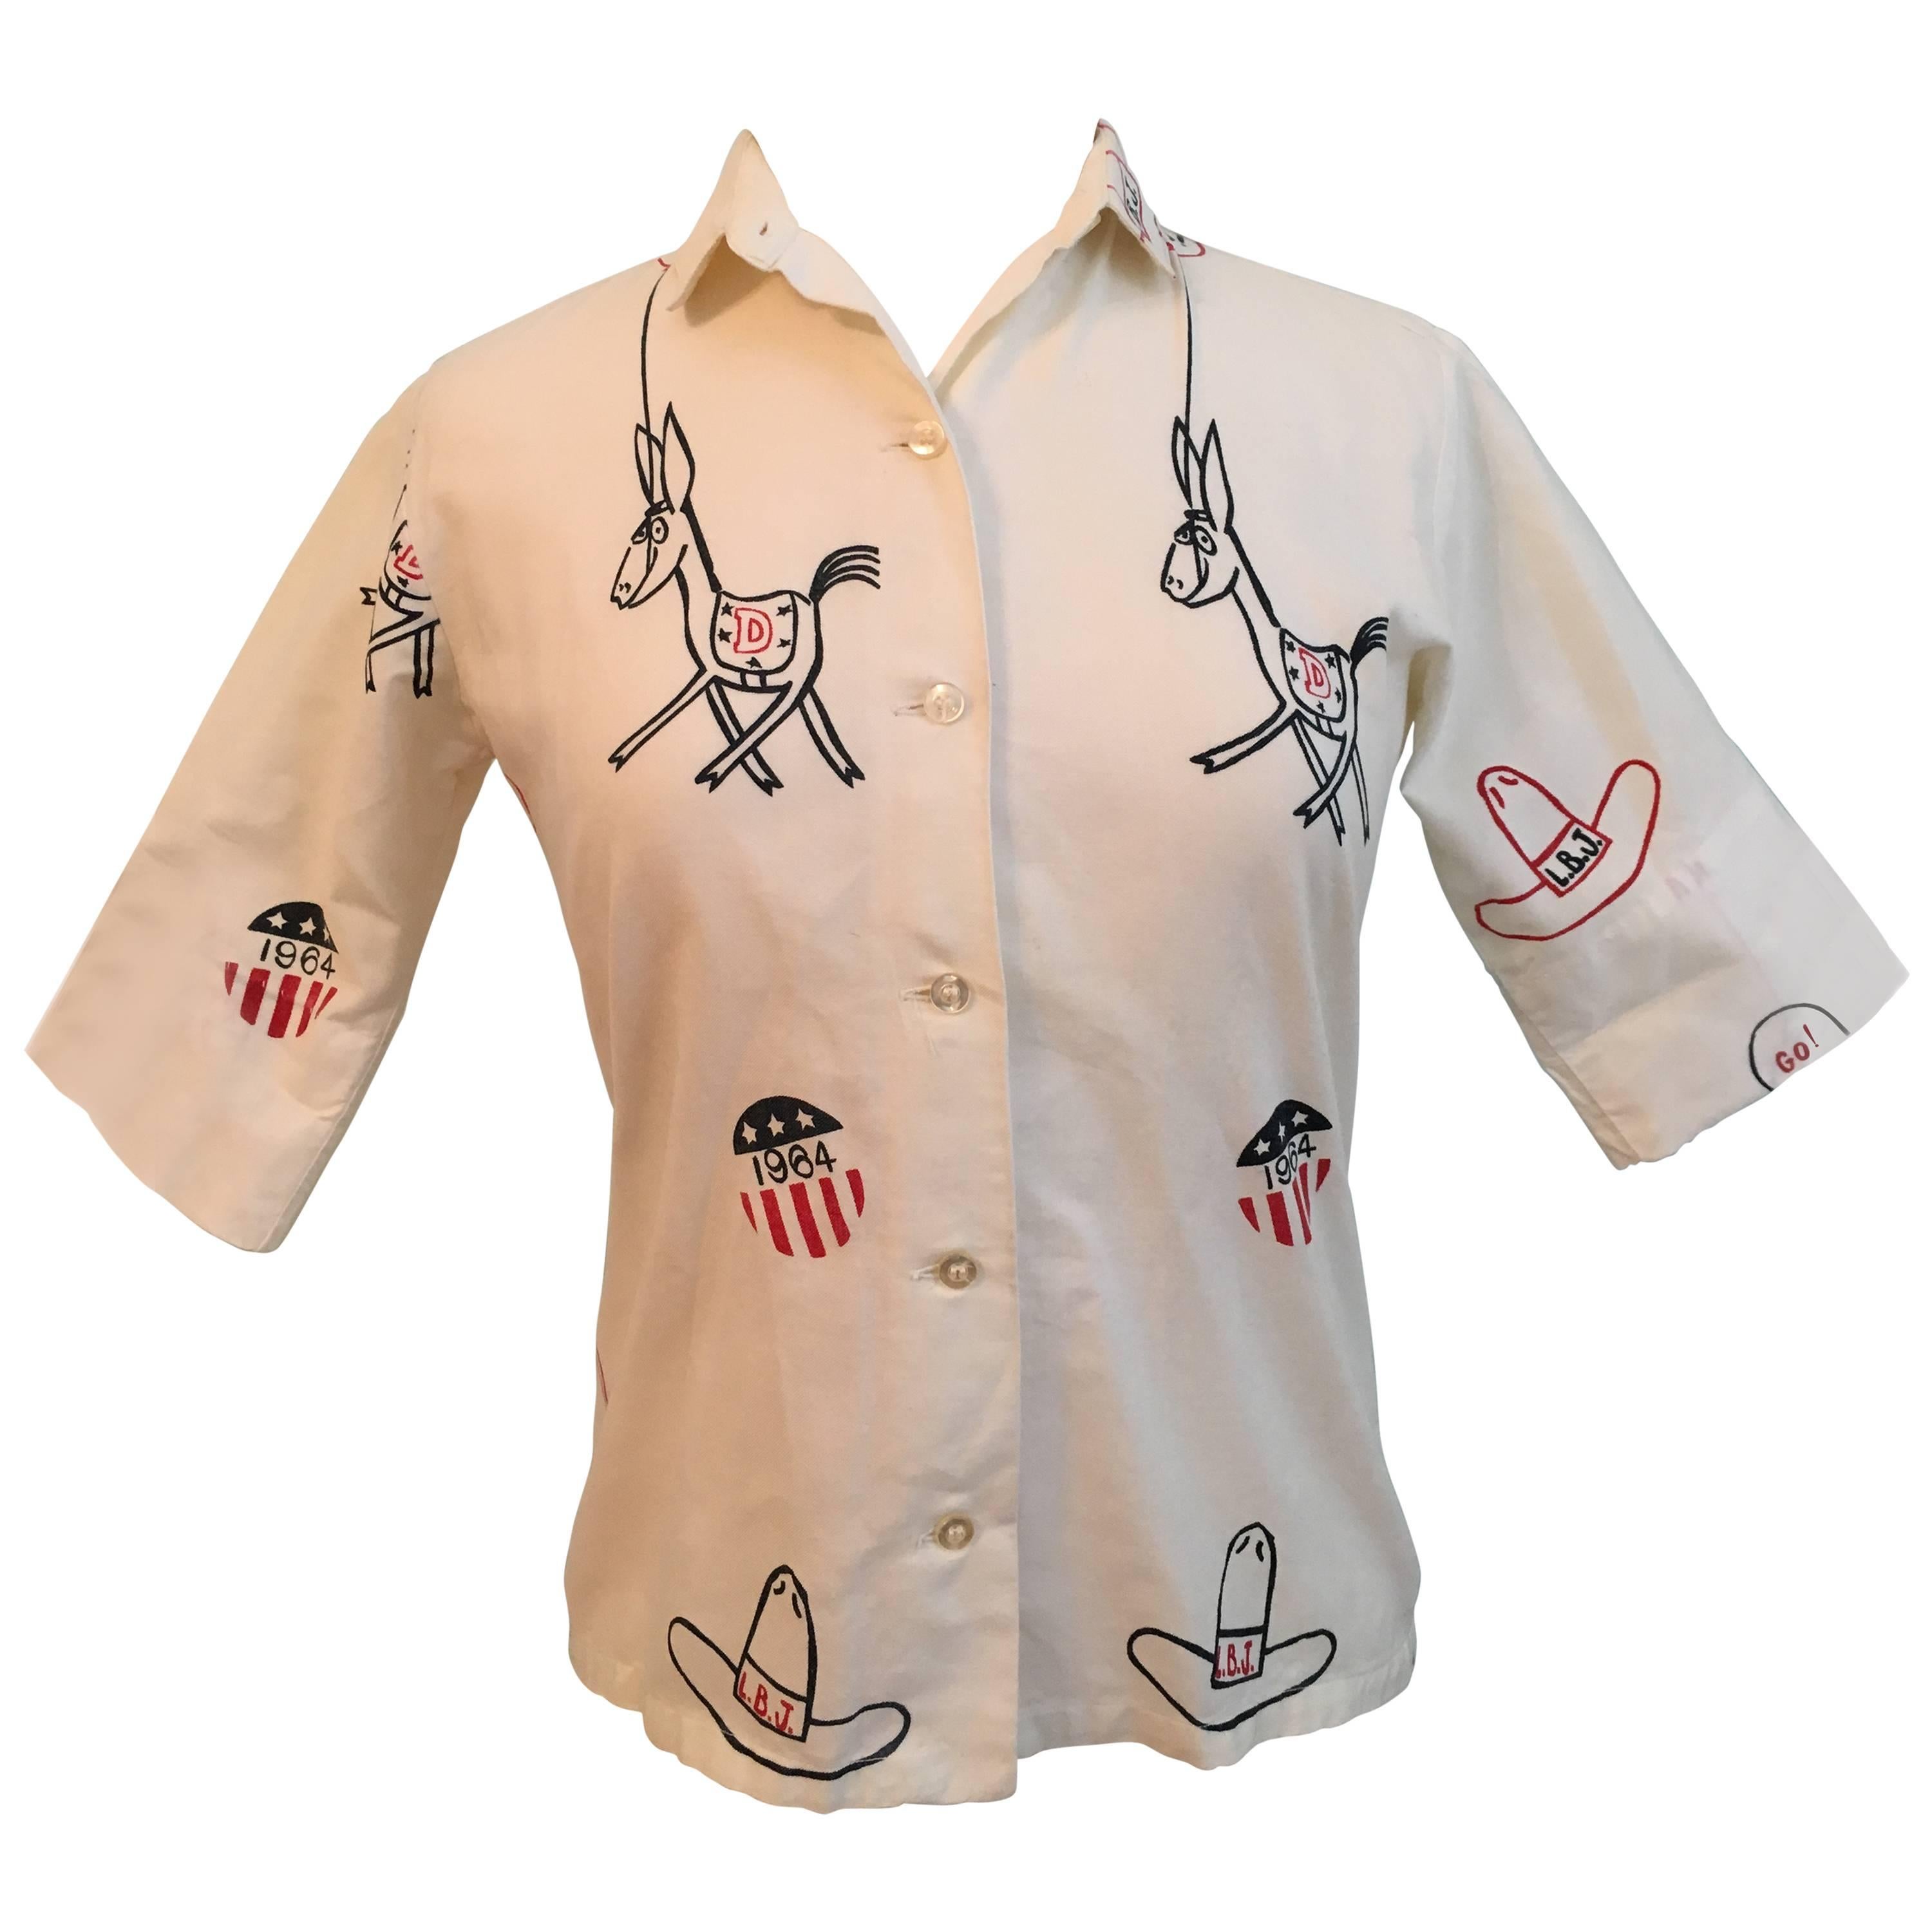 1964 Democratic Convention Blouse by The Vested Gentress 